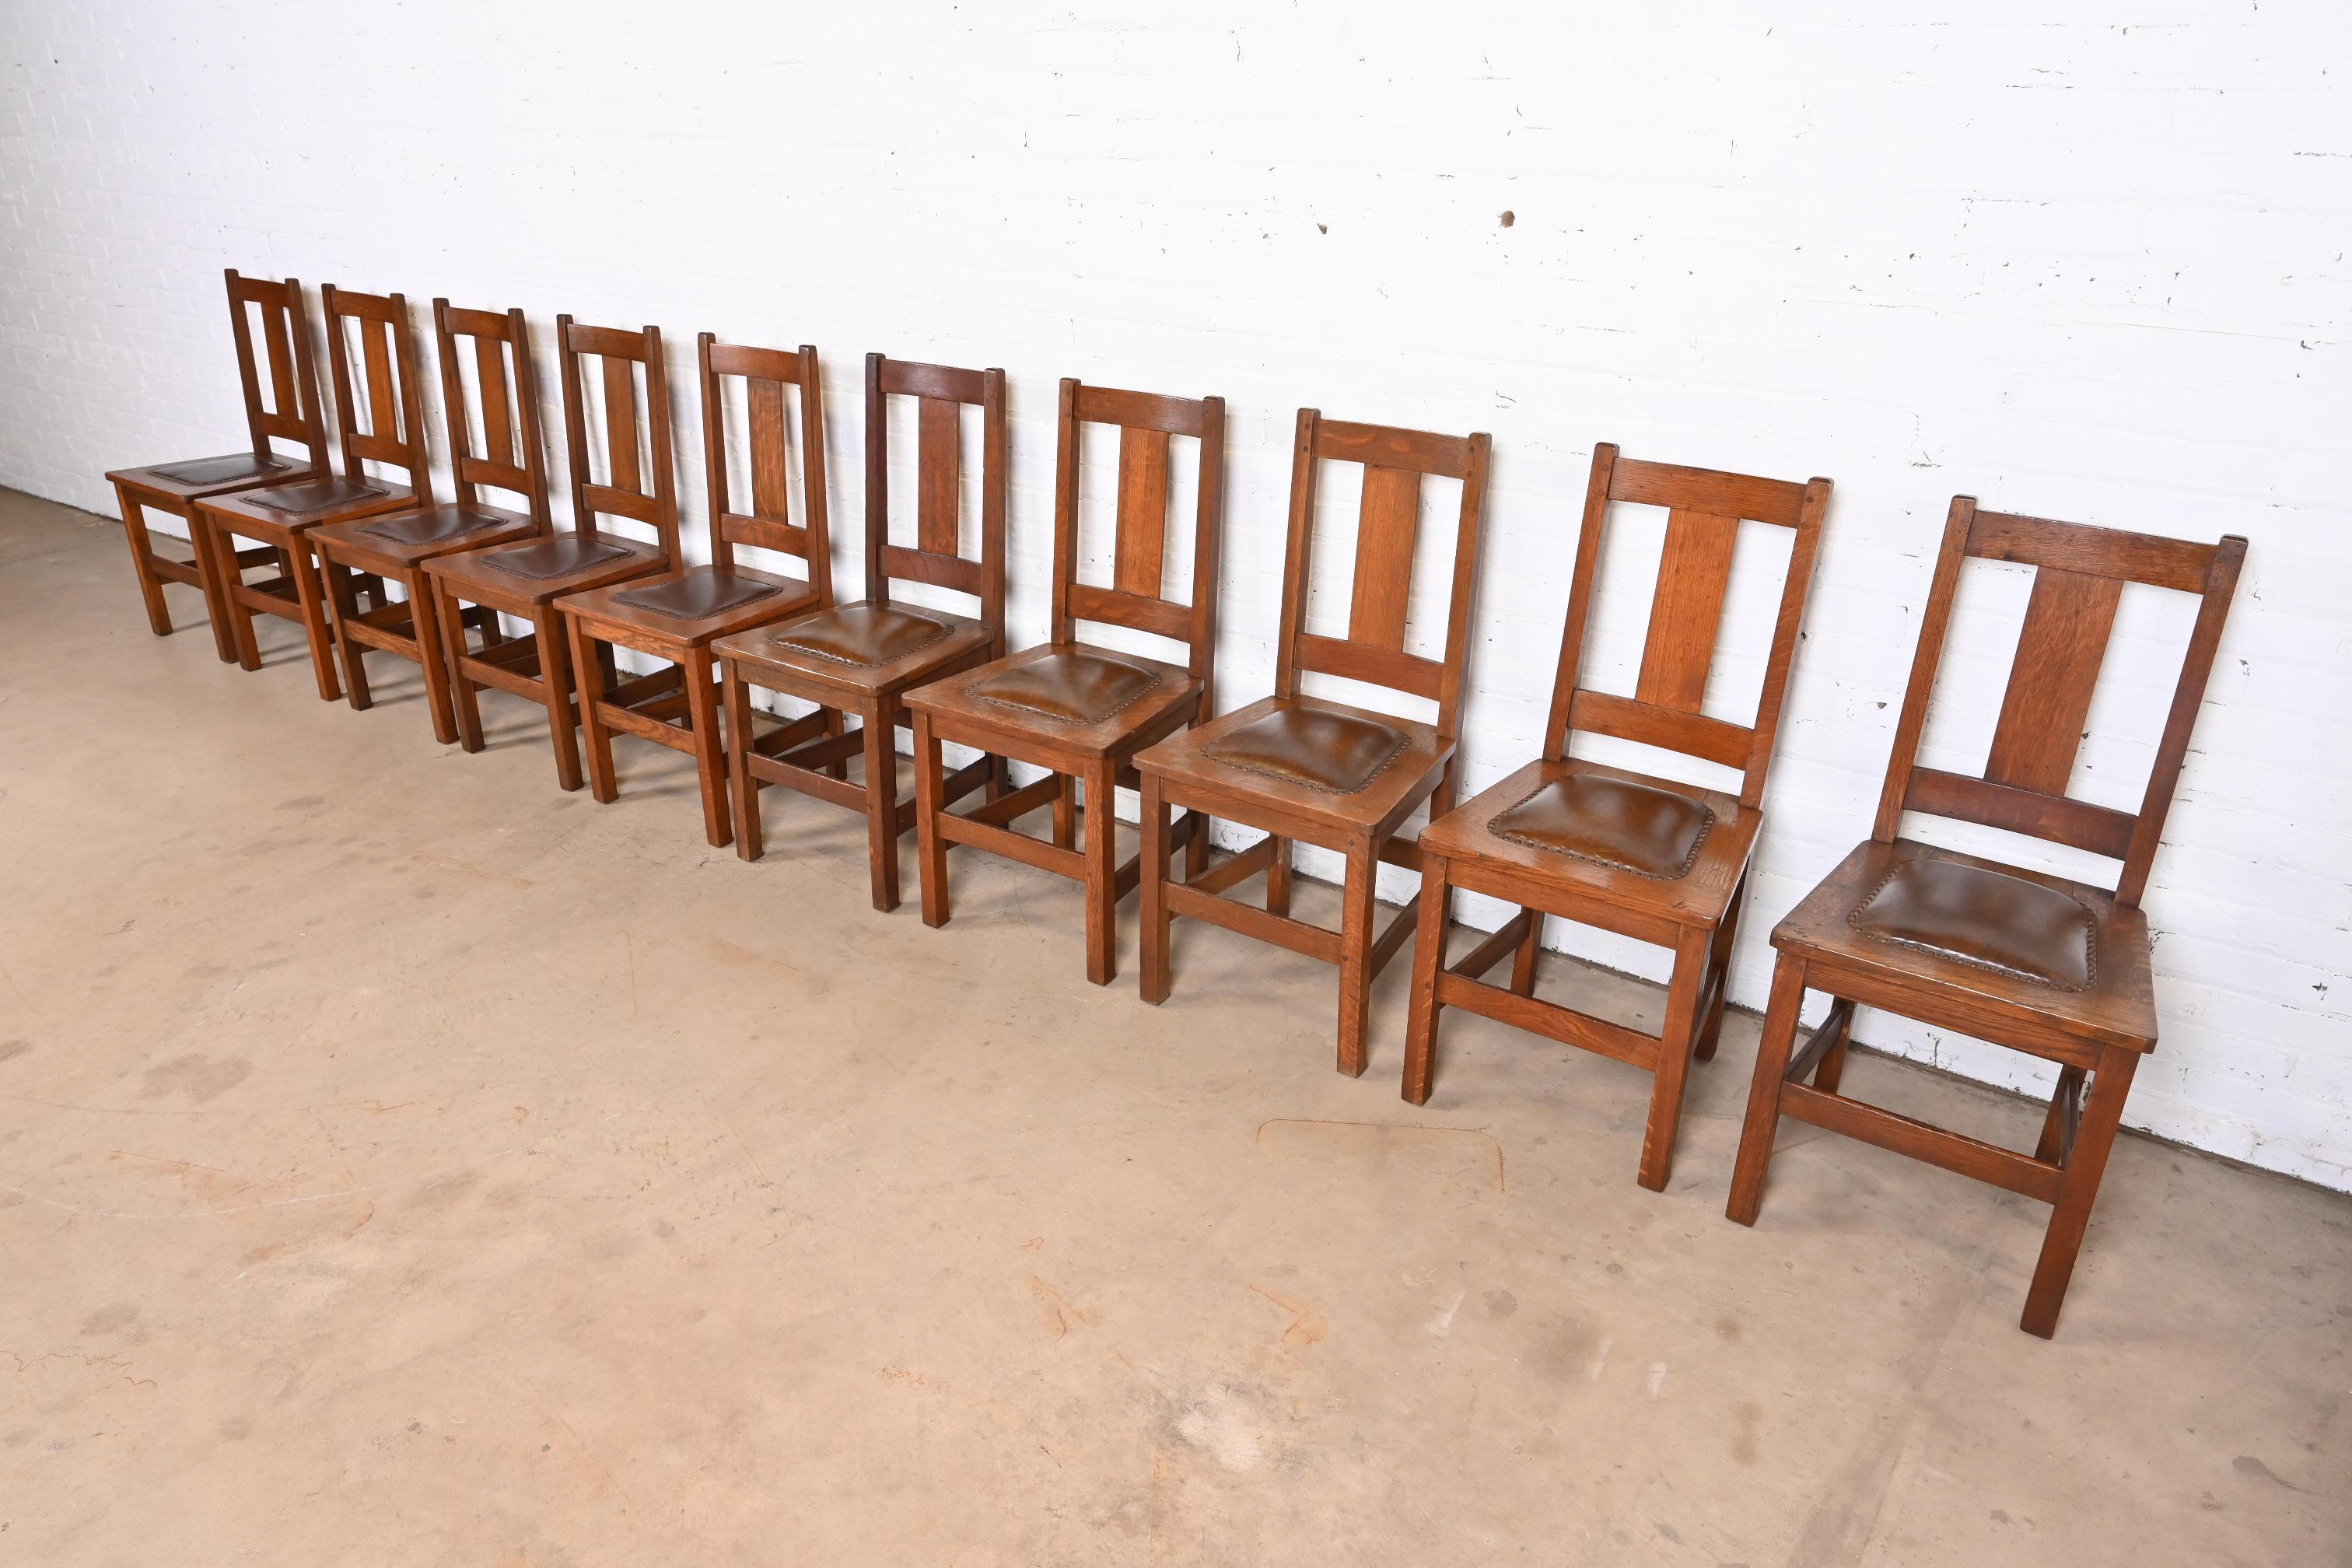 A rare and beautiful set of ten Mission or Arts & Crafts dining chairs

By Limbert

USA, Early 20th Century

Solid quarter sawn oak frames, with studded leather upholstered seats.

Measures: 17